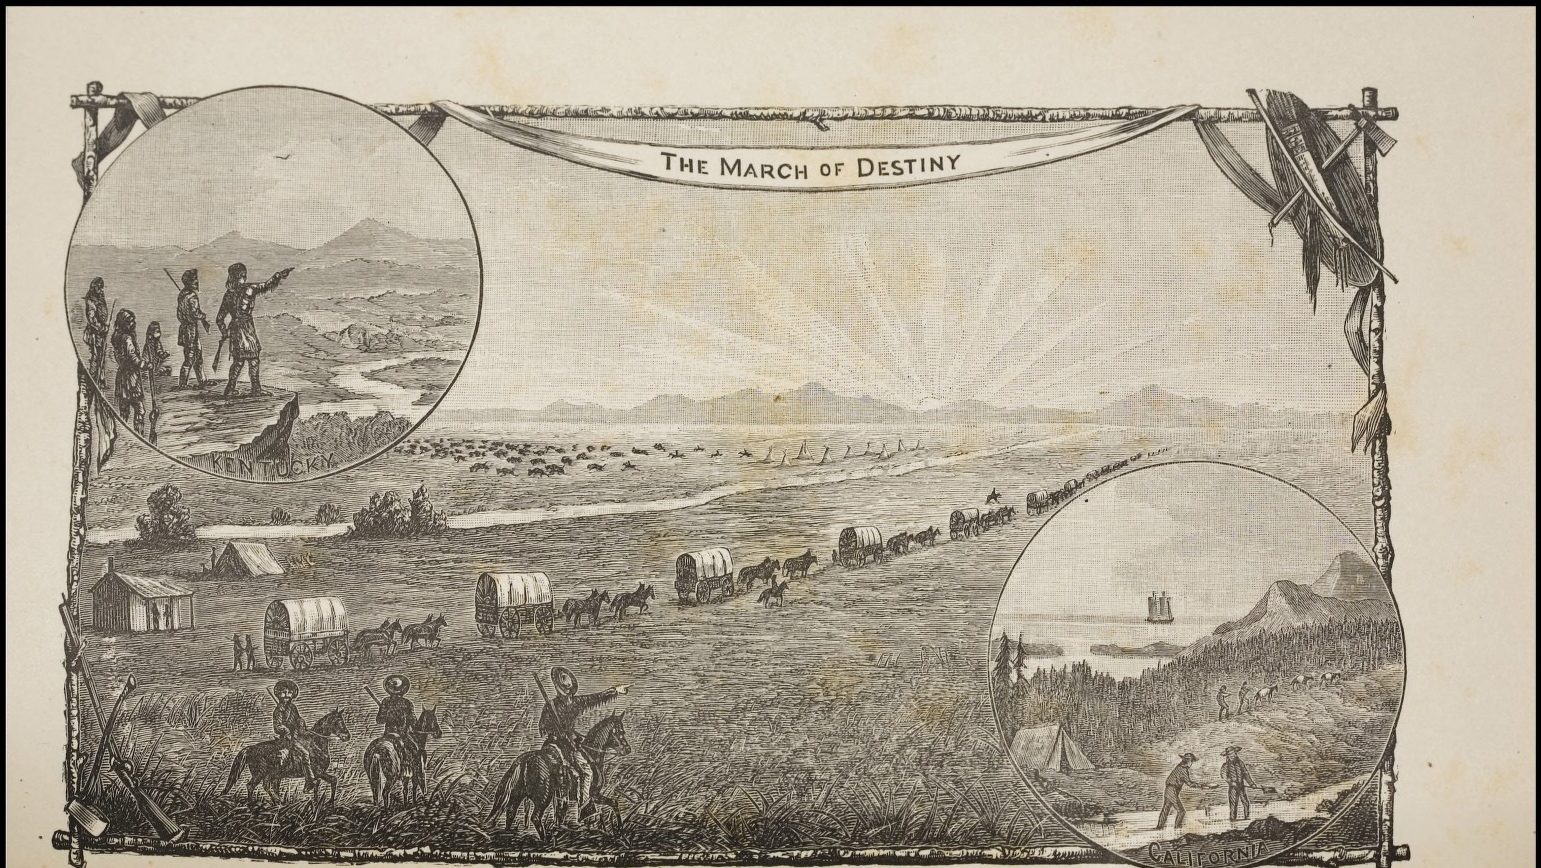 Print of a hand-drawn image. A wagon train of pioneer wagons move westward across a plain. In the background is a mountain range with the sun rising over it. In the upper left is a small circular image of white explorers standing on the edge of a cliff and pointing to a river valley below. In the lower right is a circular image of men two men on a road by a tent. In the background is a body of water with a boat. The image’s title “The March of Destiny” hangs across the top of the main image on a banner.